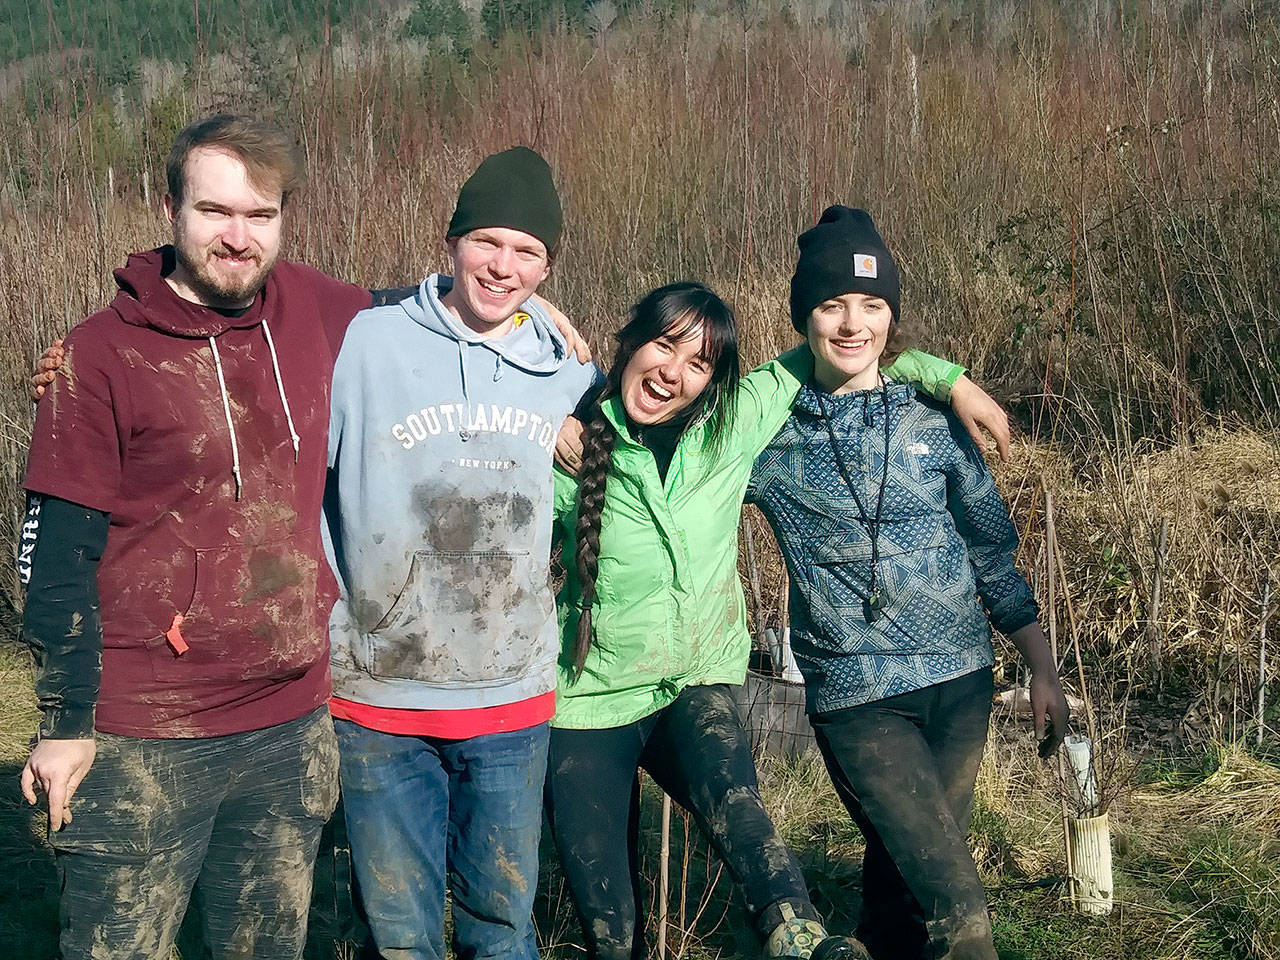 Teen crew leaders, from left, David Smith, Wyatt Steffans, Anika Avelino and Jasmine Heuberger-Yearian, lead a tree-planting event near Tarboo Creek, sponsored by Northwest Watershed Institute and the Unkitawa Foundation.